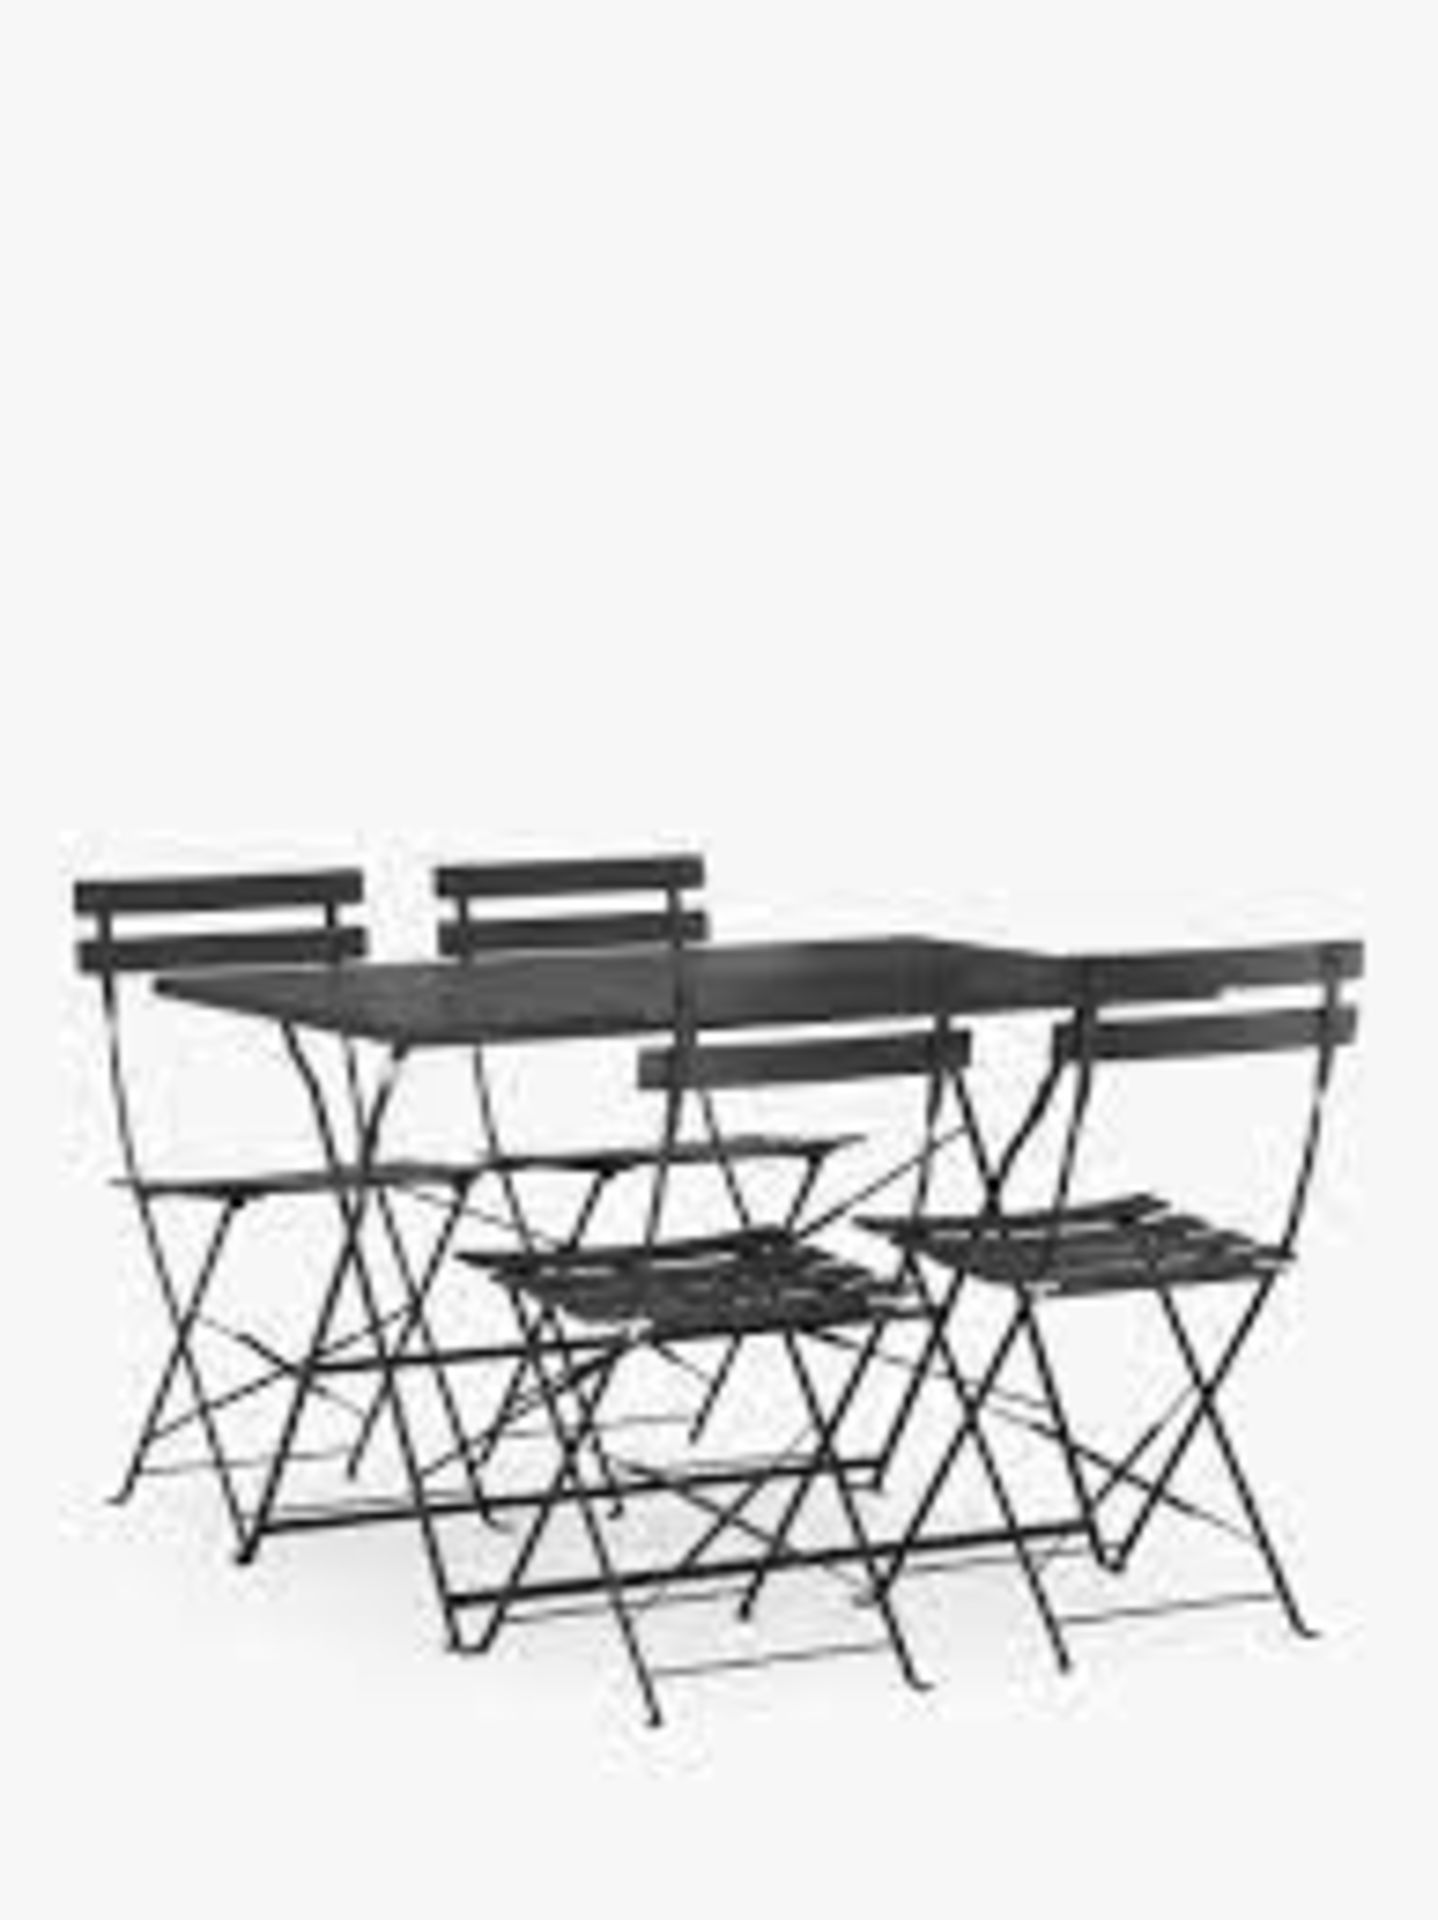 BRAND NEW JOHN LEWIS Camden 4-Seater Garden Table & Chairs Set, Grey. RRP £298.50. Create a - Image 2 of 2